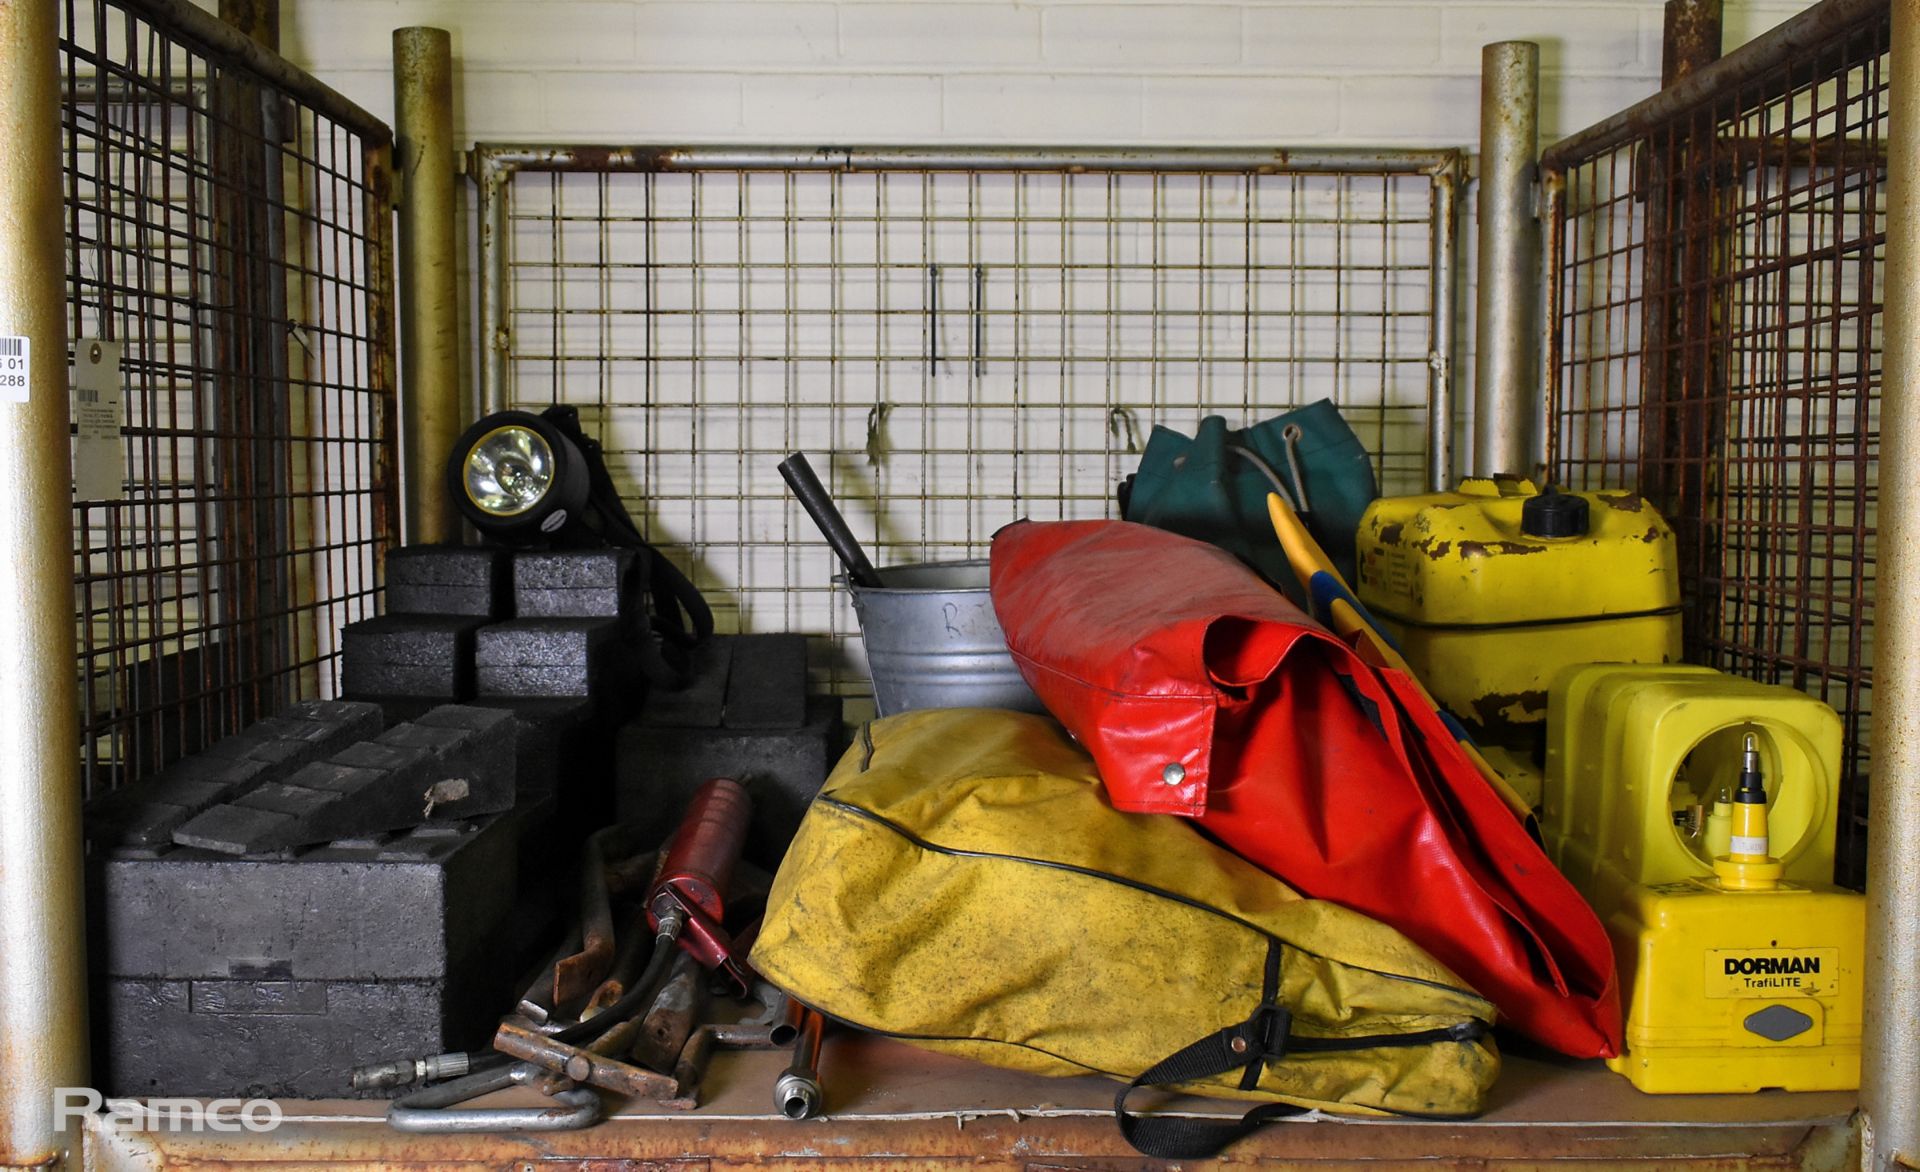 Fire and rescue accessories - hand tools, RTC chocks & blocks, ropes, lights, chemical sorbent pads